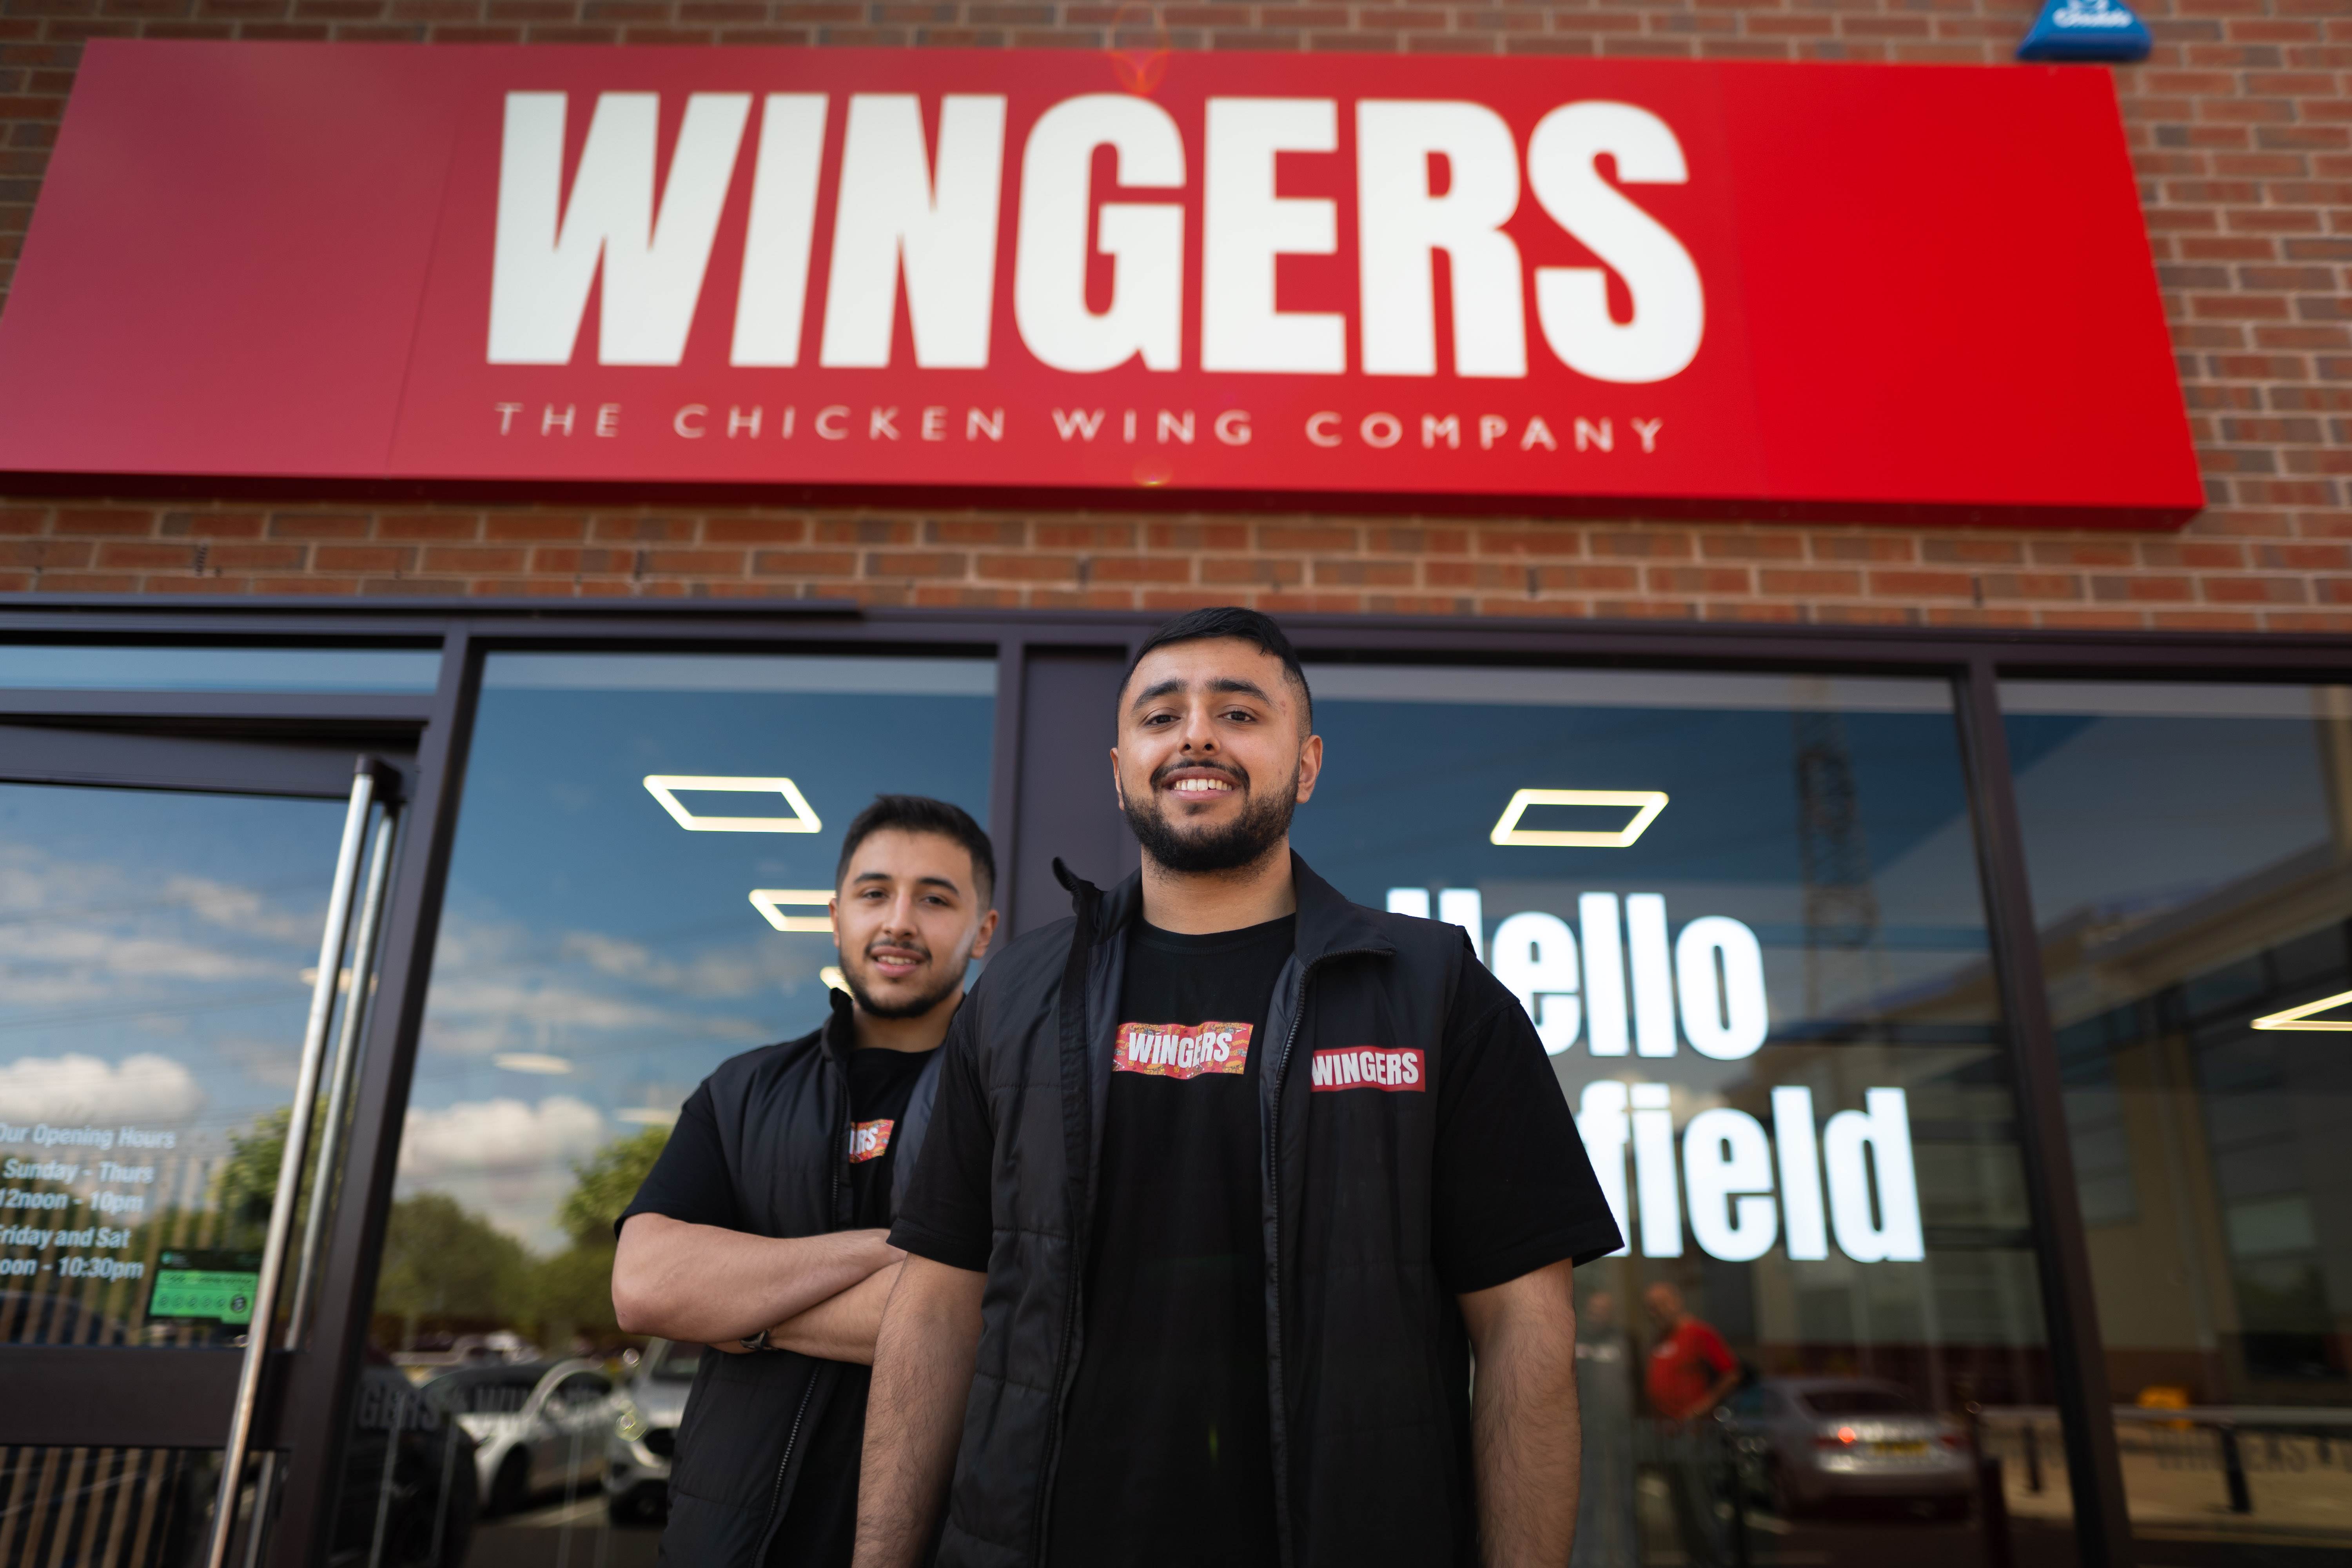 Wingers founders